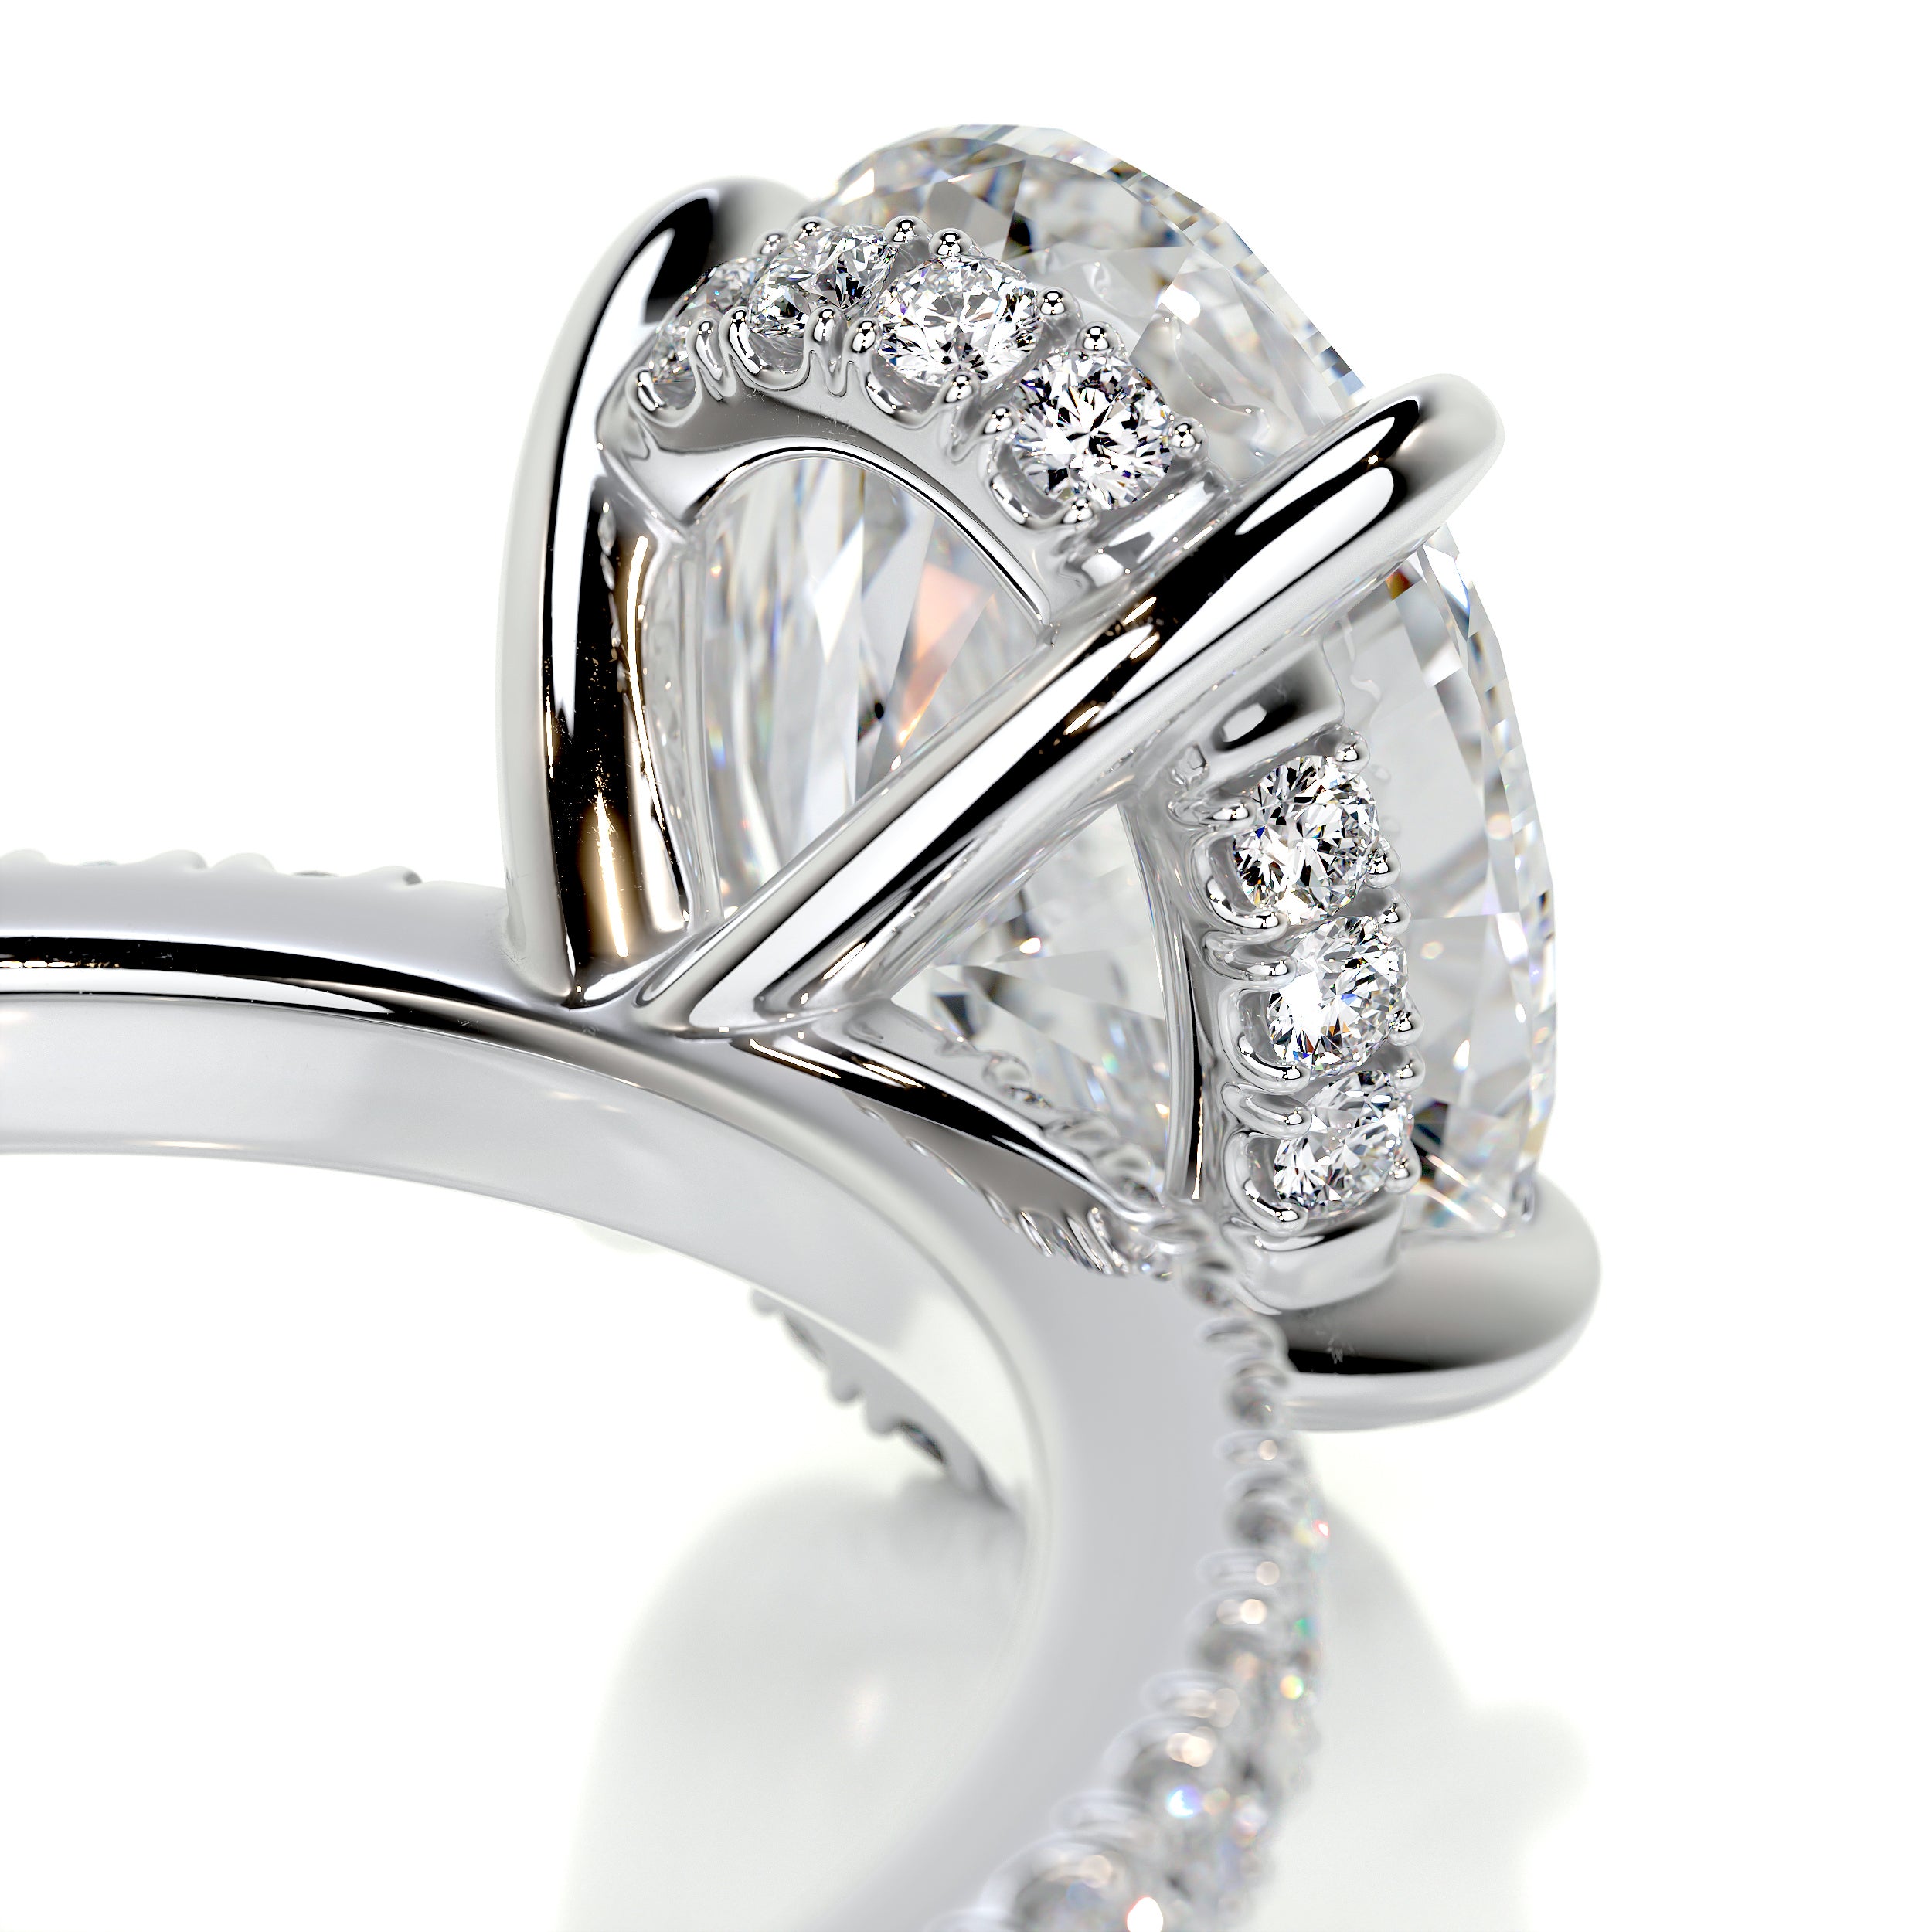 Lucy Diamond Engagement Ring -18K White Gold